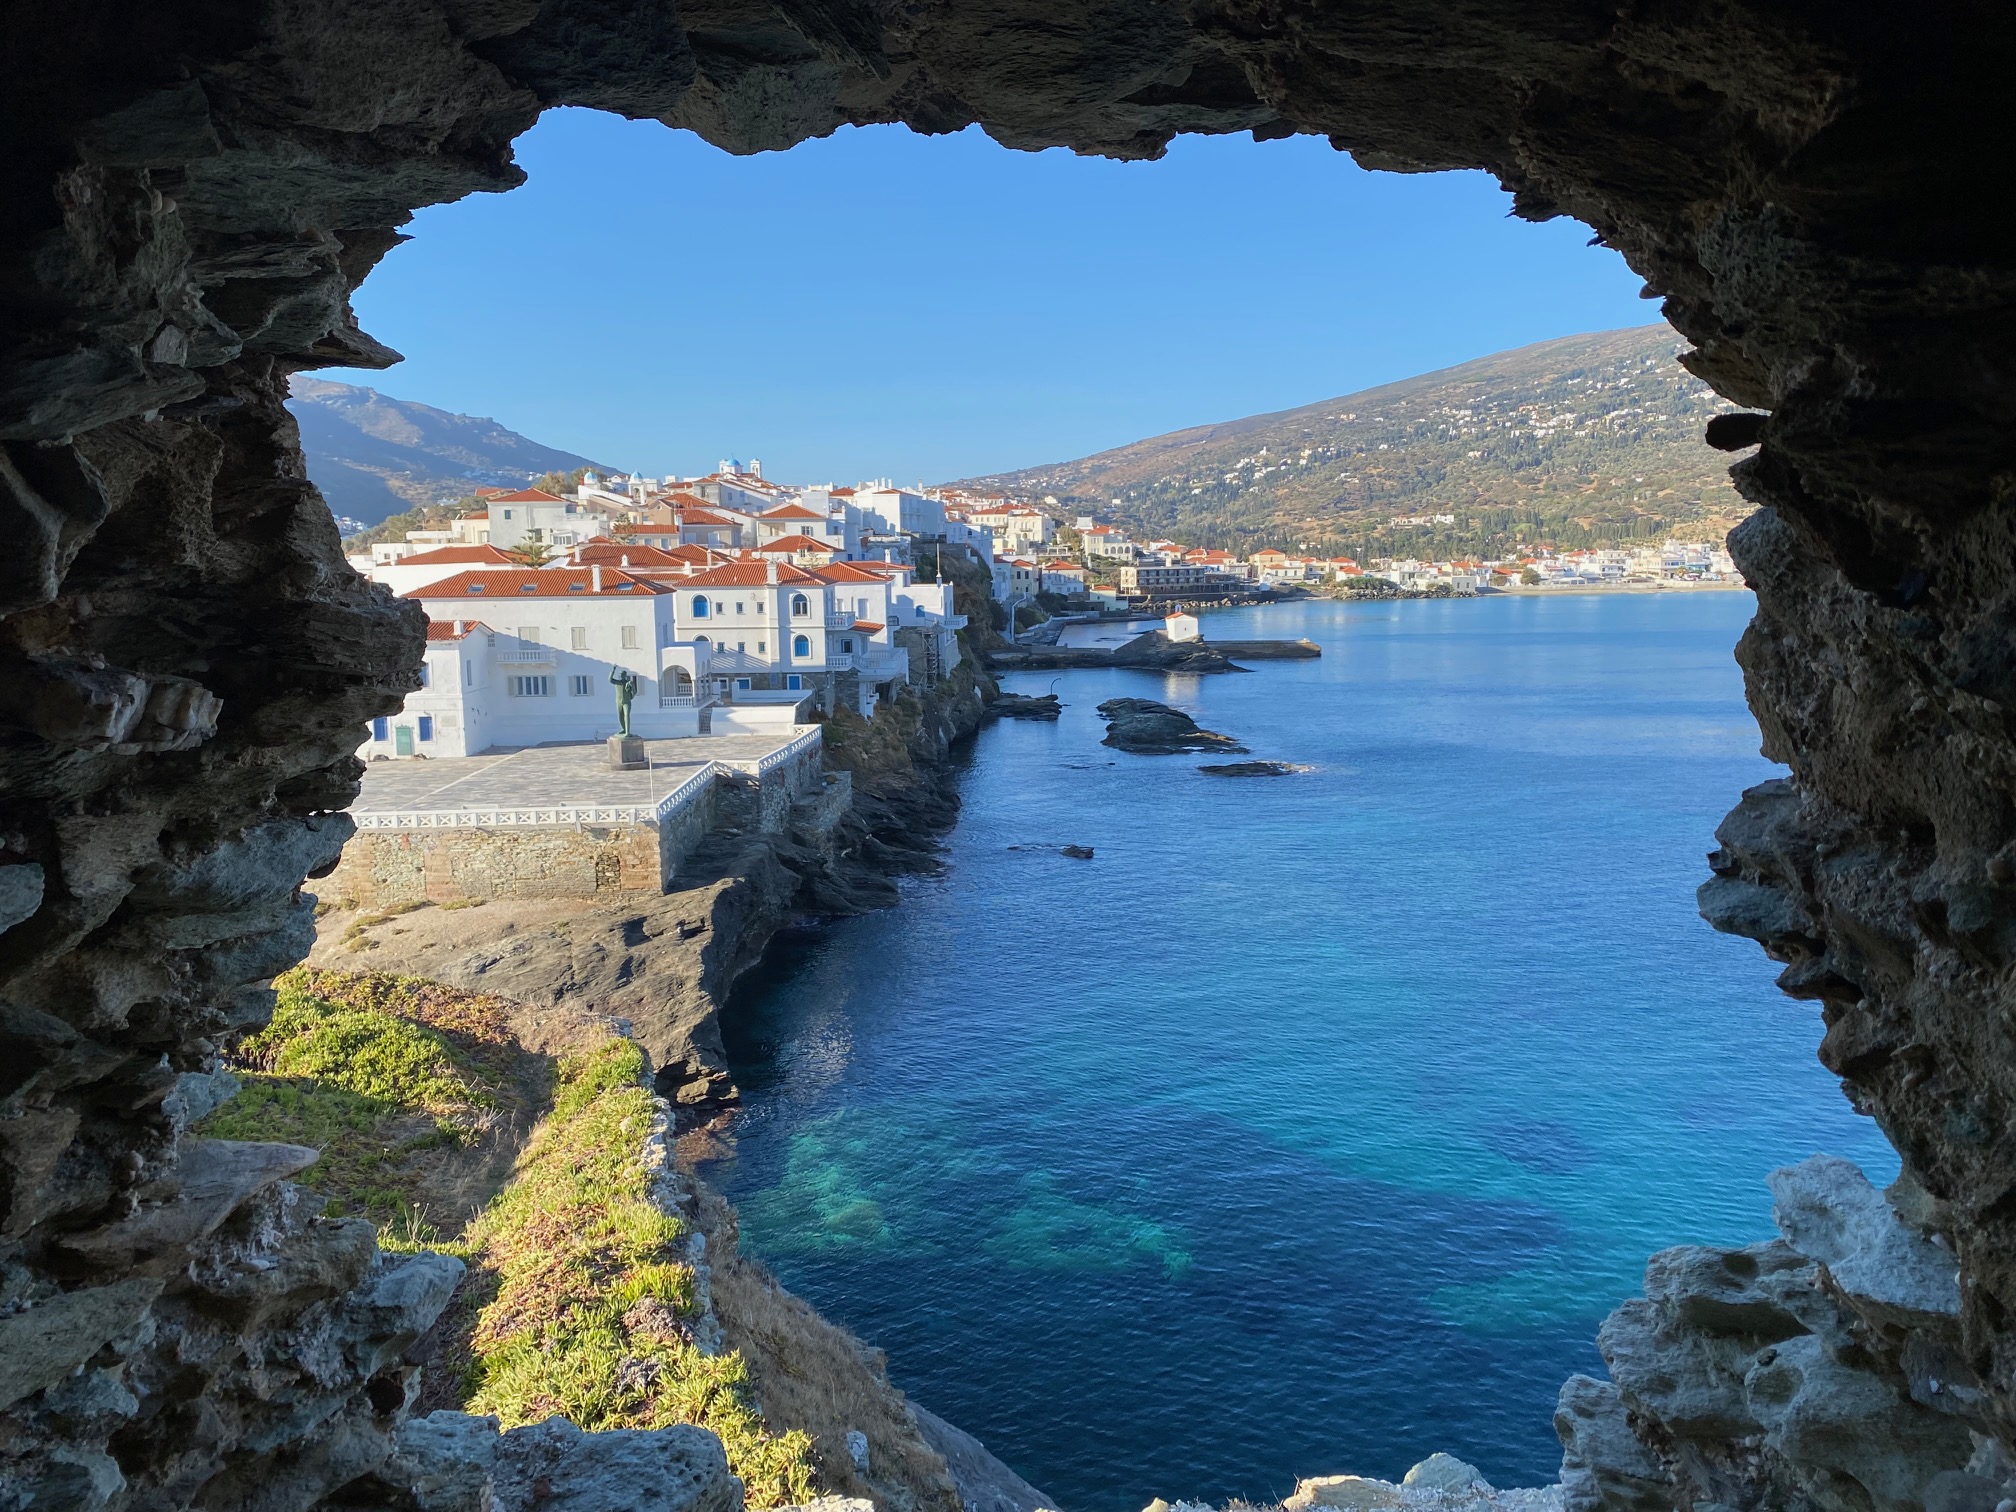 White buildings with red roofs in Chora seen through arch in remains of Venetian castle